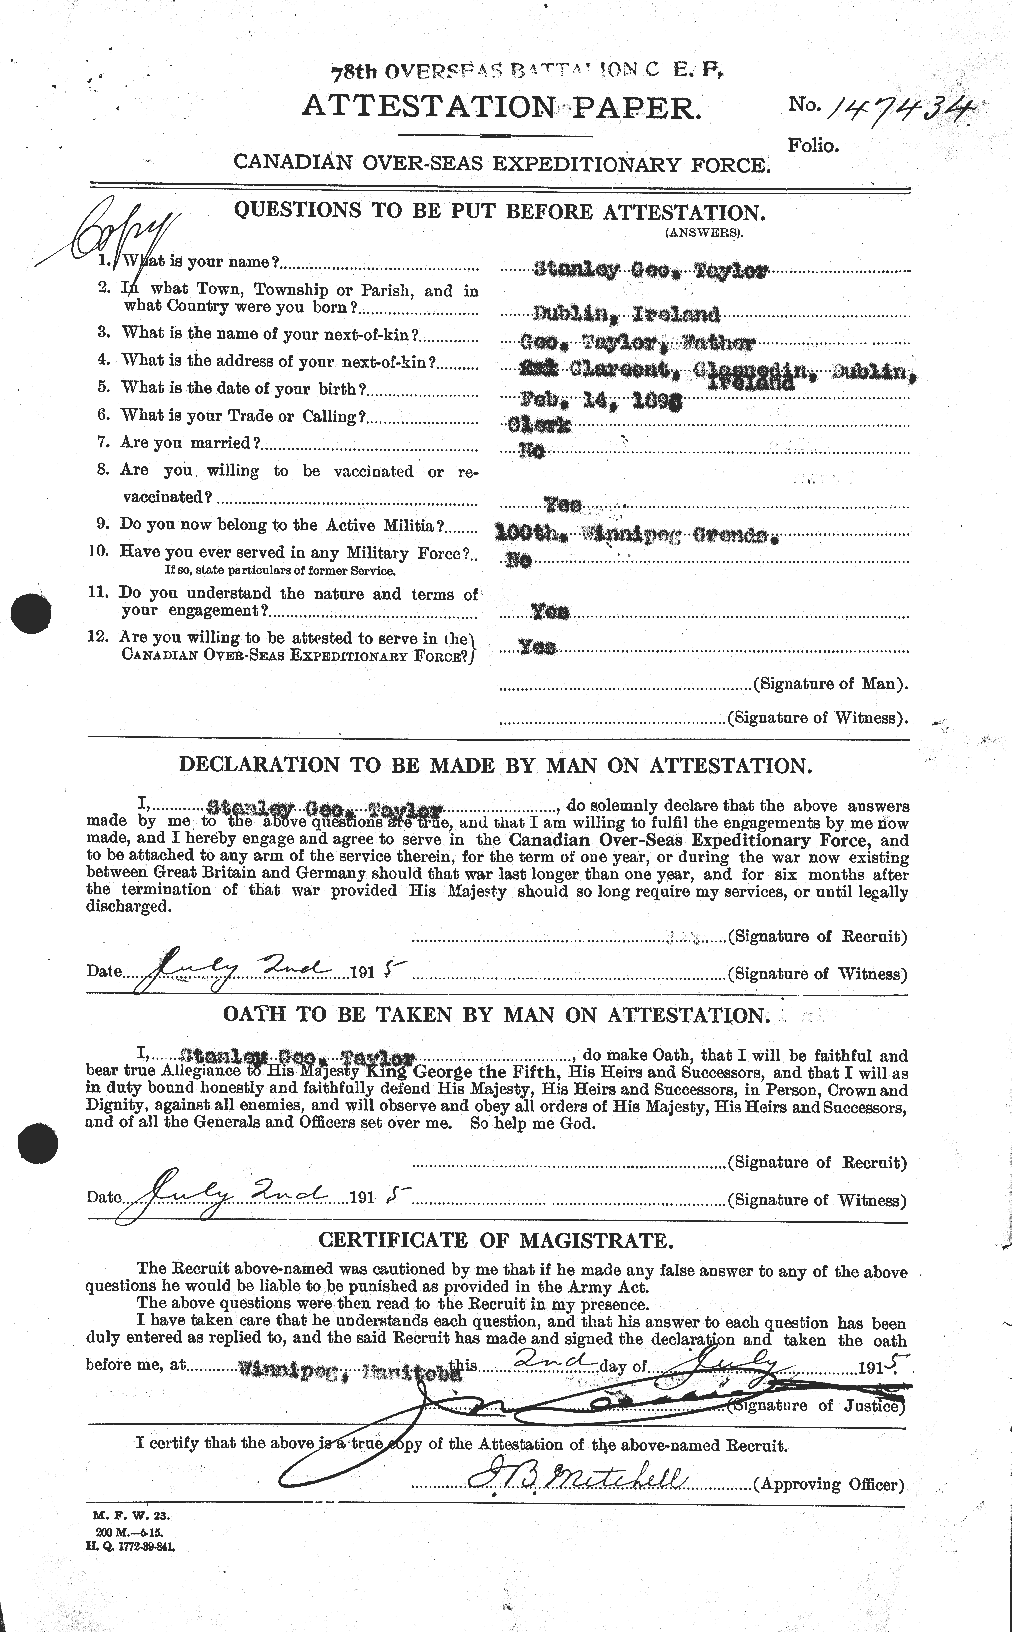 Personnel Records of the First World War - CEF 627919a